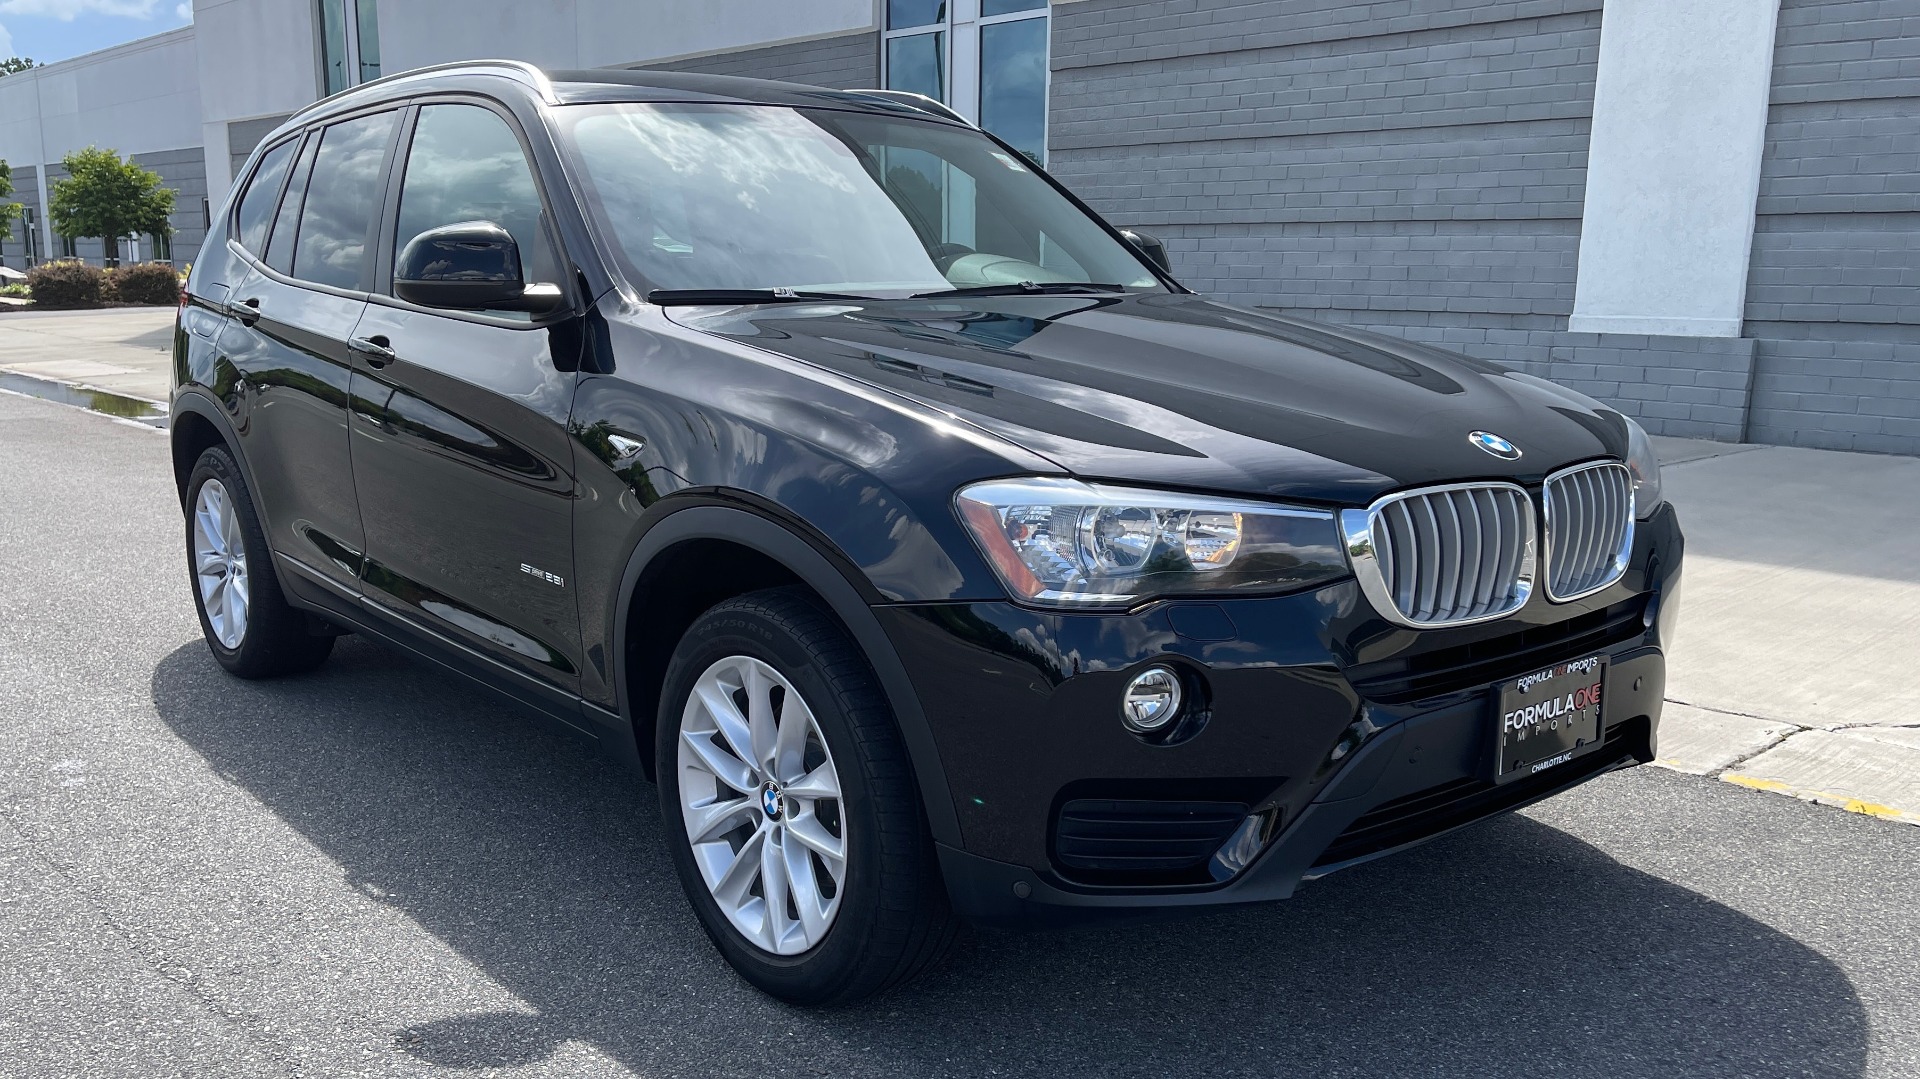 Used 2017 BMW X3 SDRIVE28I / DRVR ASST PKG / HTD STS / REARVIEW / 18IN WHEELS for sale Sold at Formula Imports in Charlotte NC 28227 5